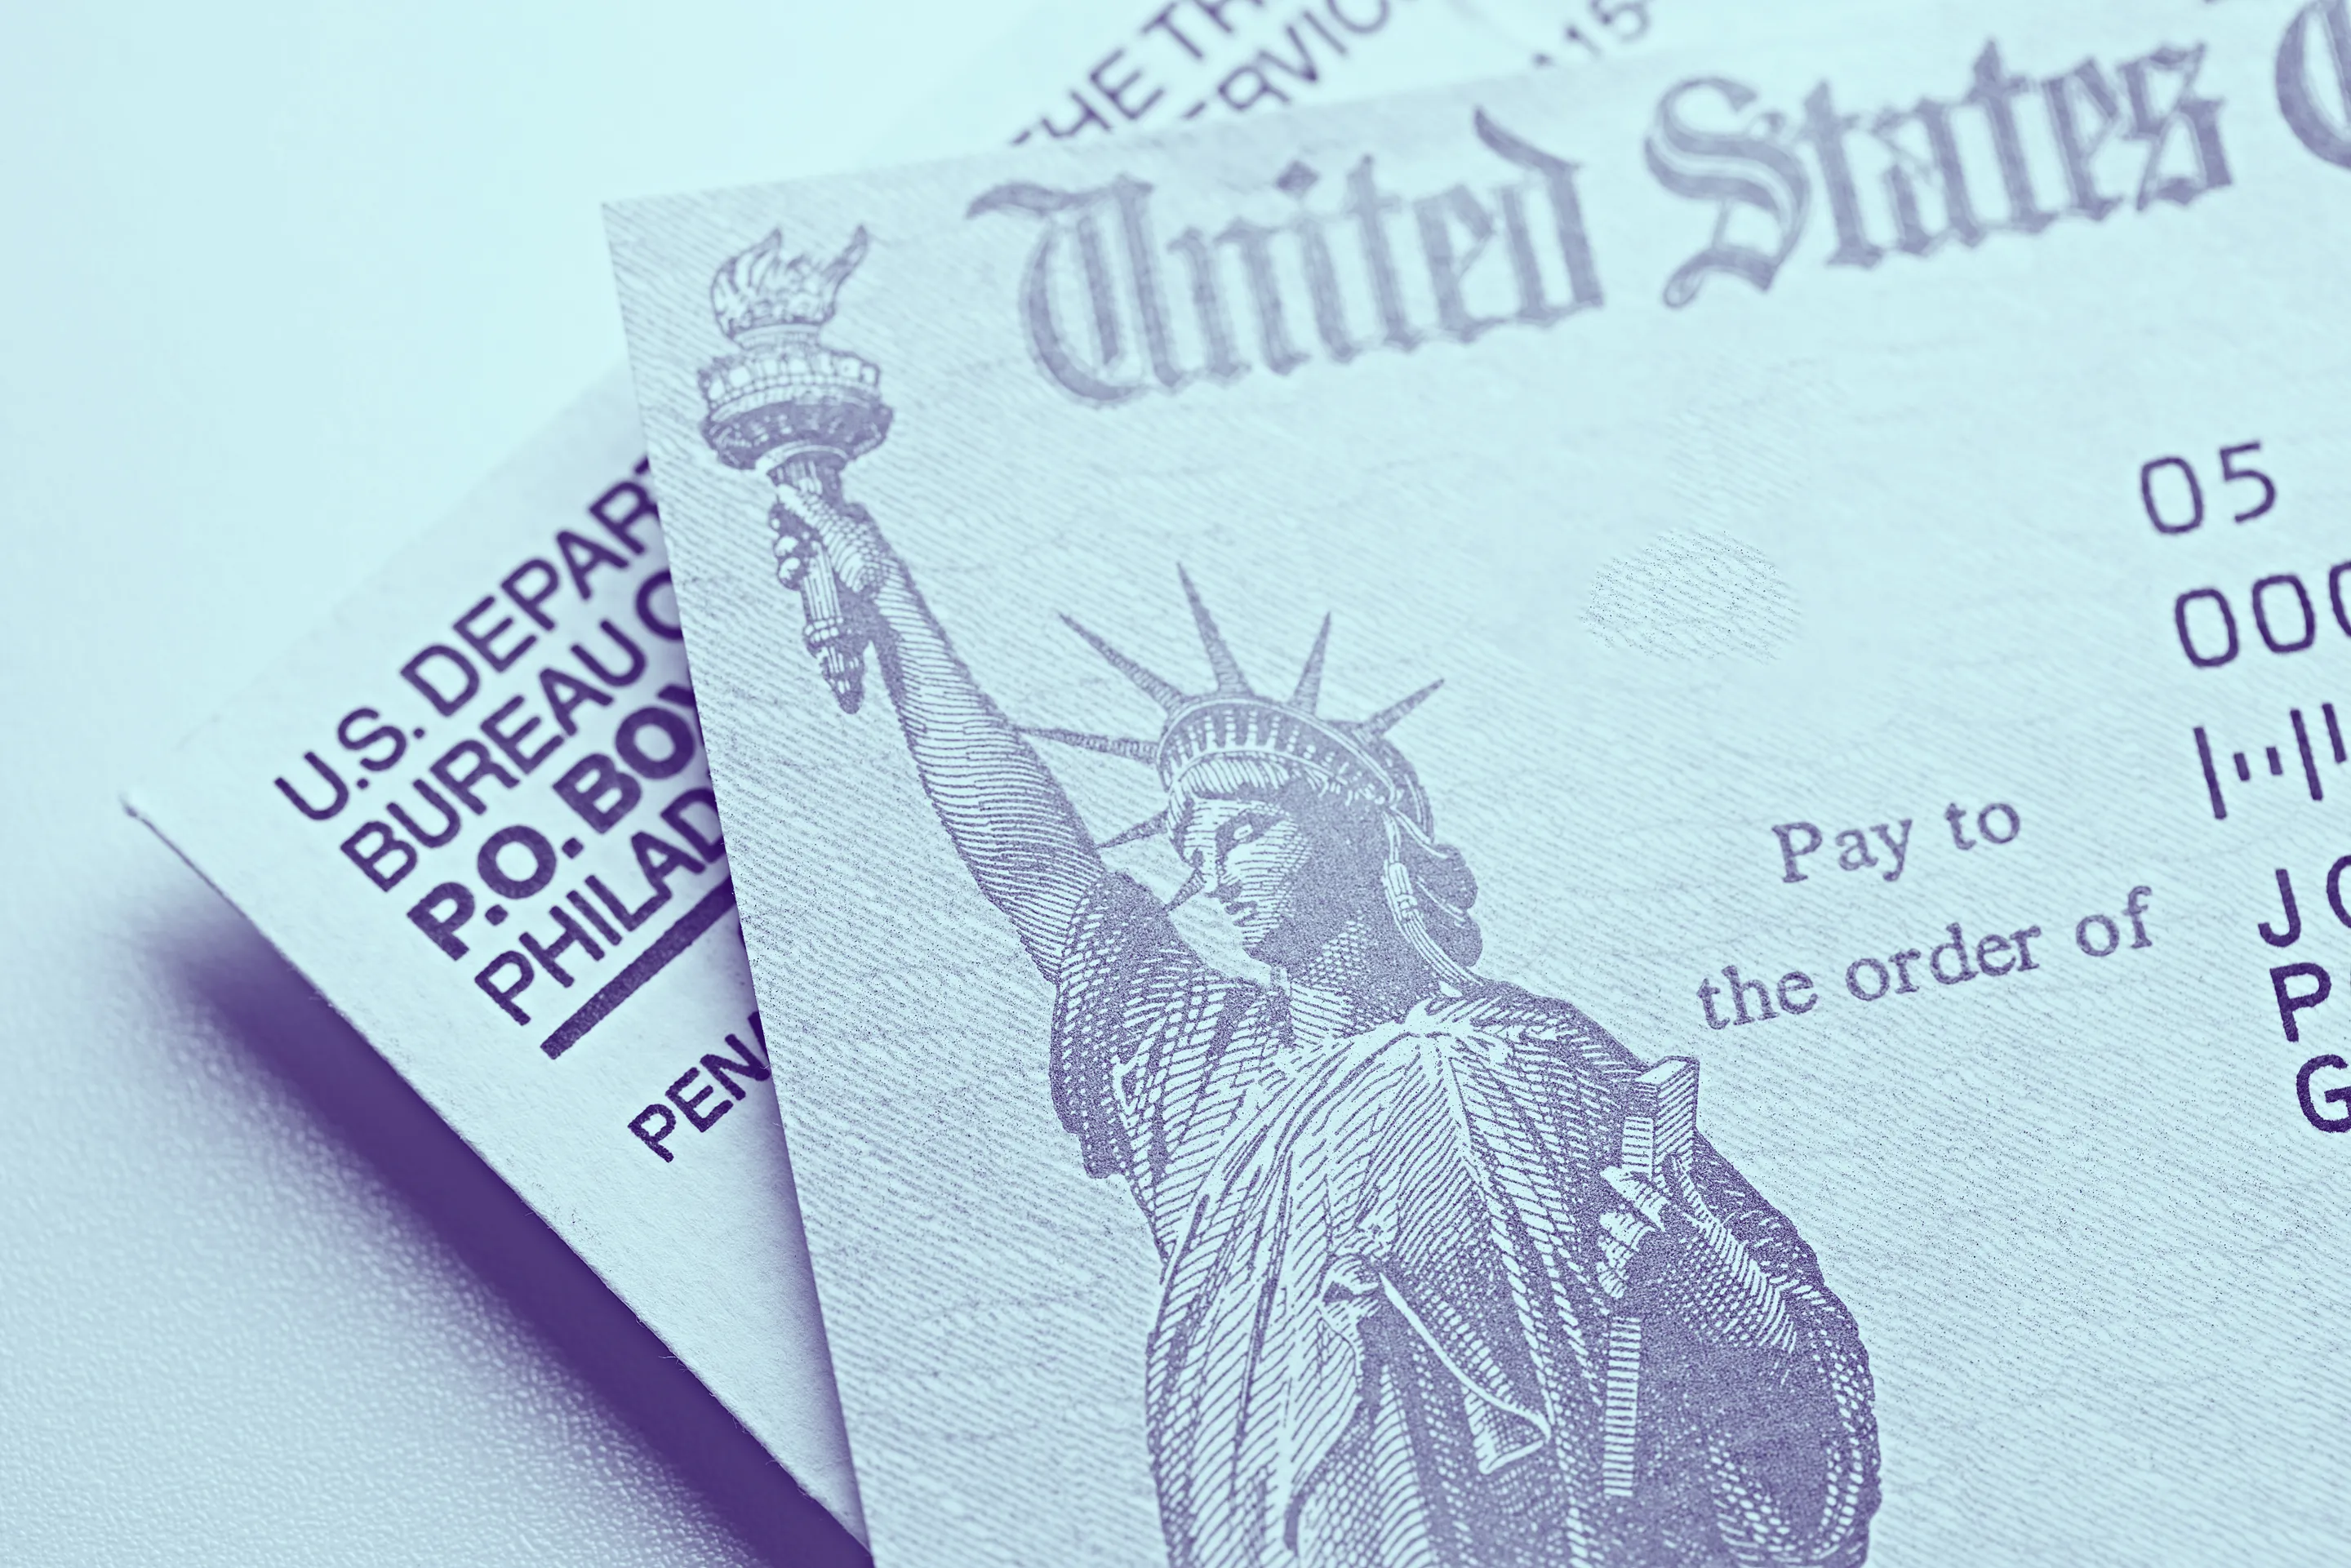 The IRS Is Mailing Letters to 9 Million People Who Never Claimed Their $1,200 Stimulus Checks